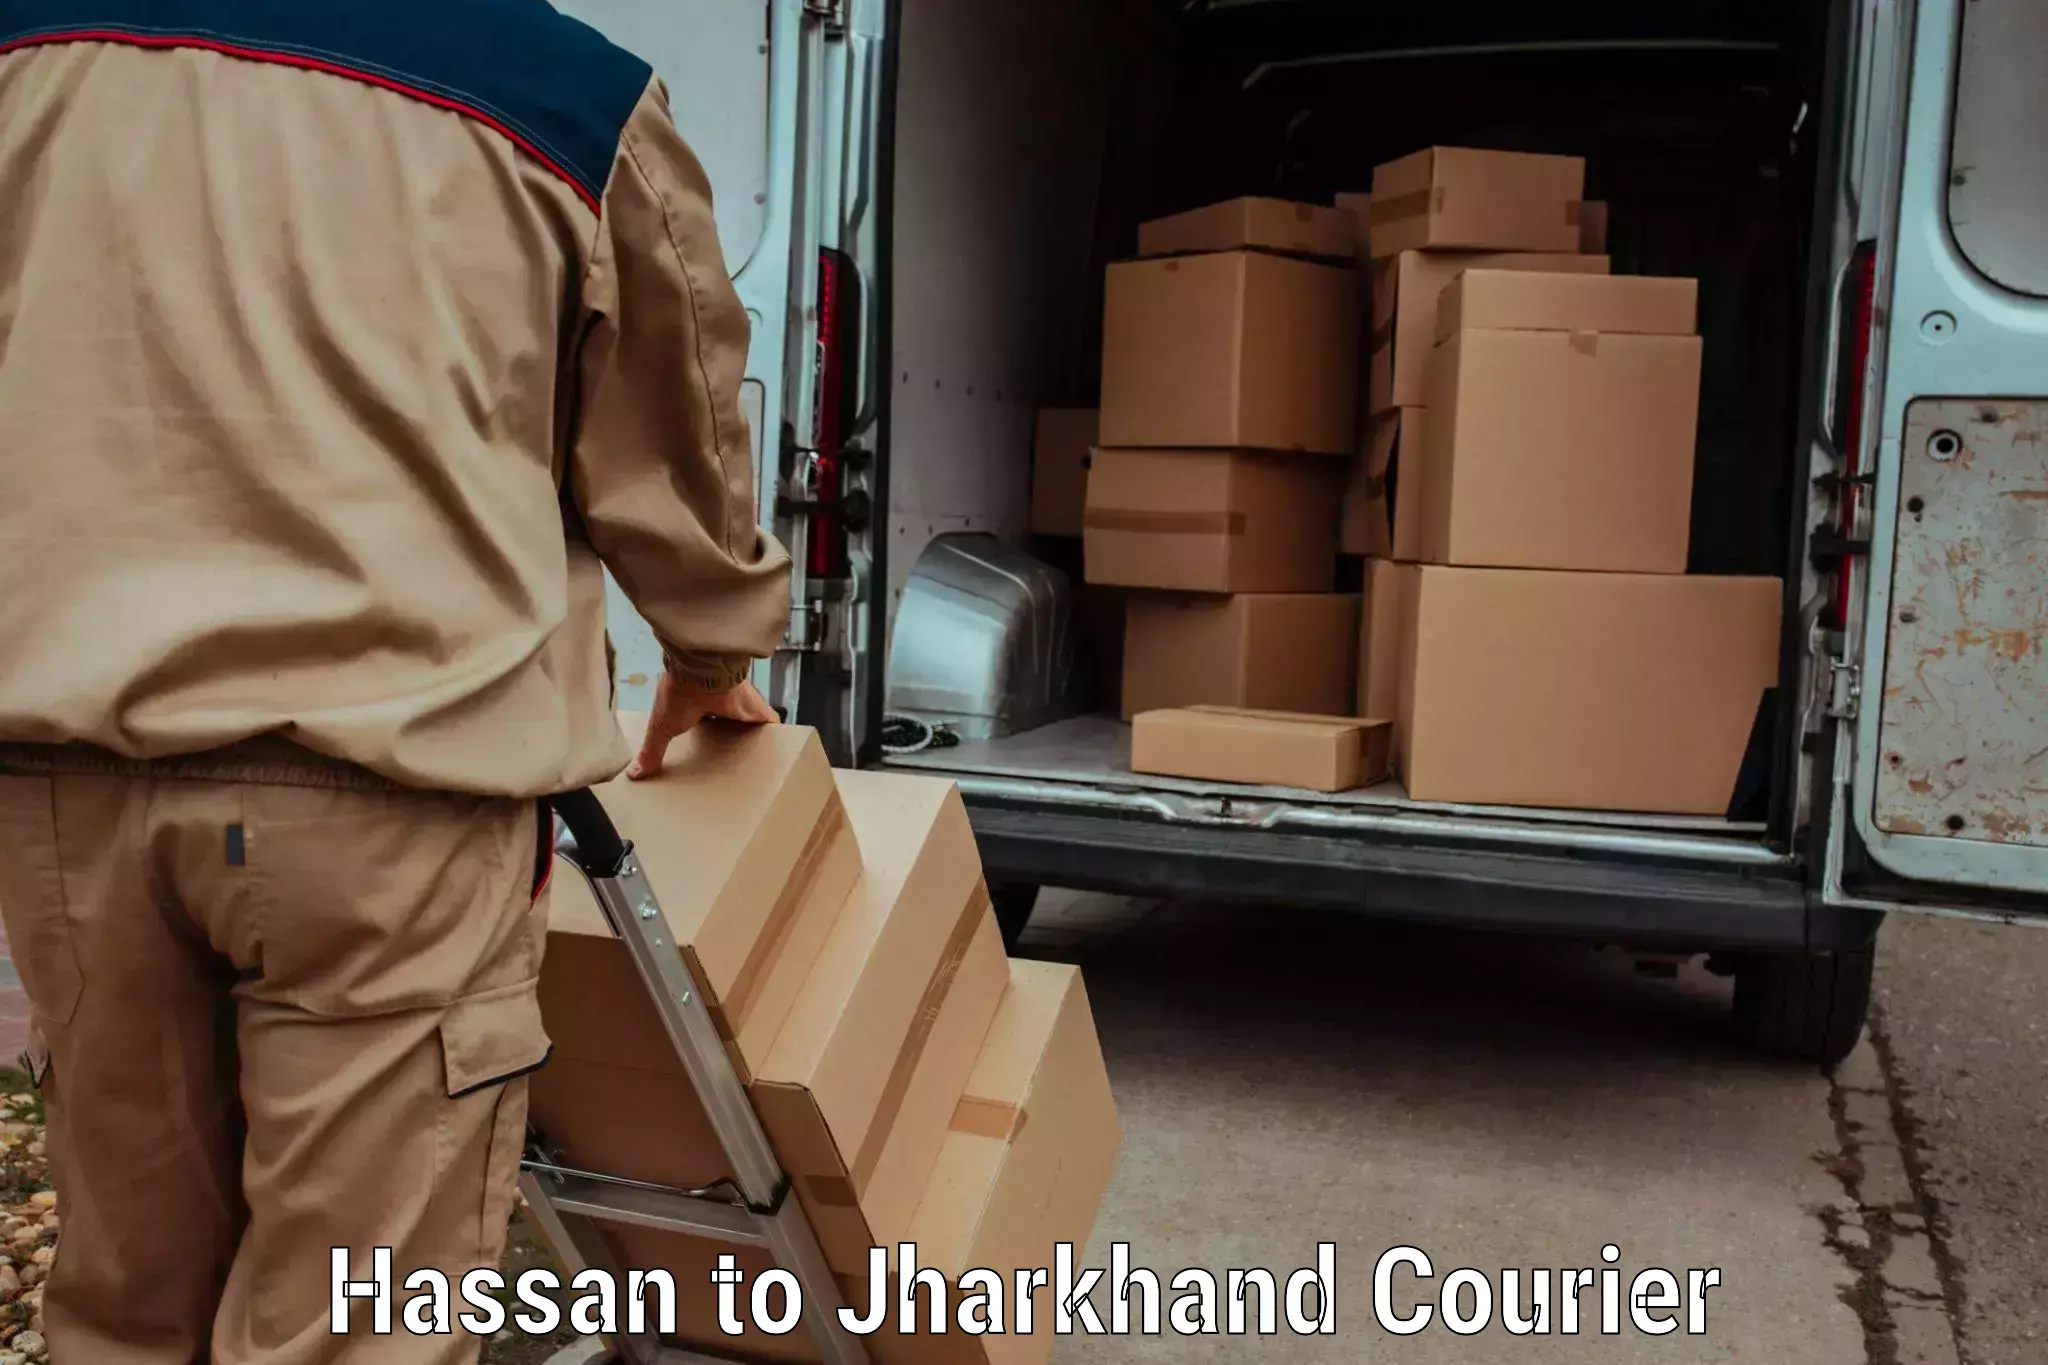 24/7 courier service Hassan to Adityapur